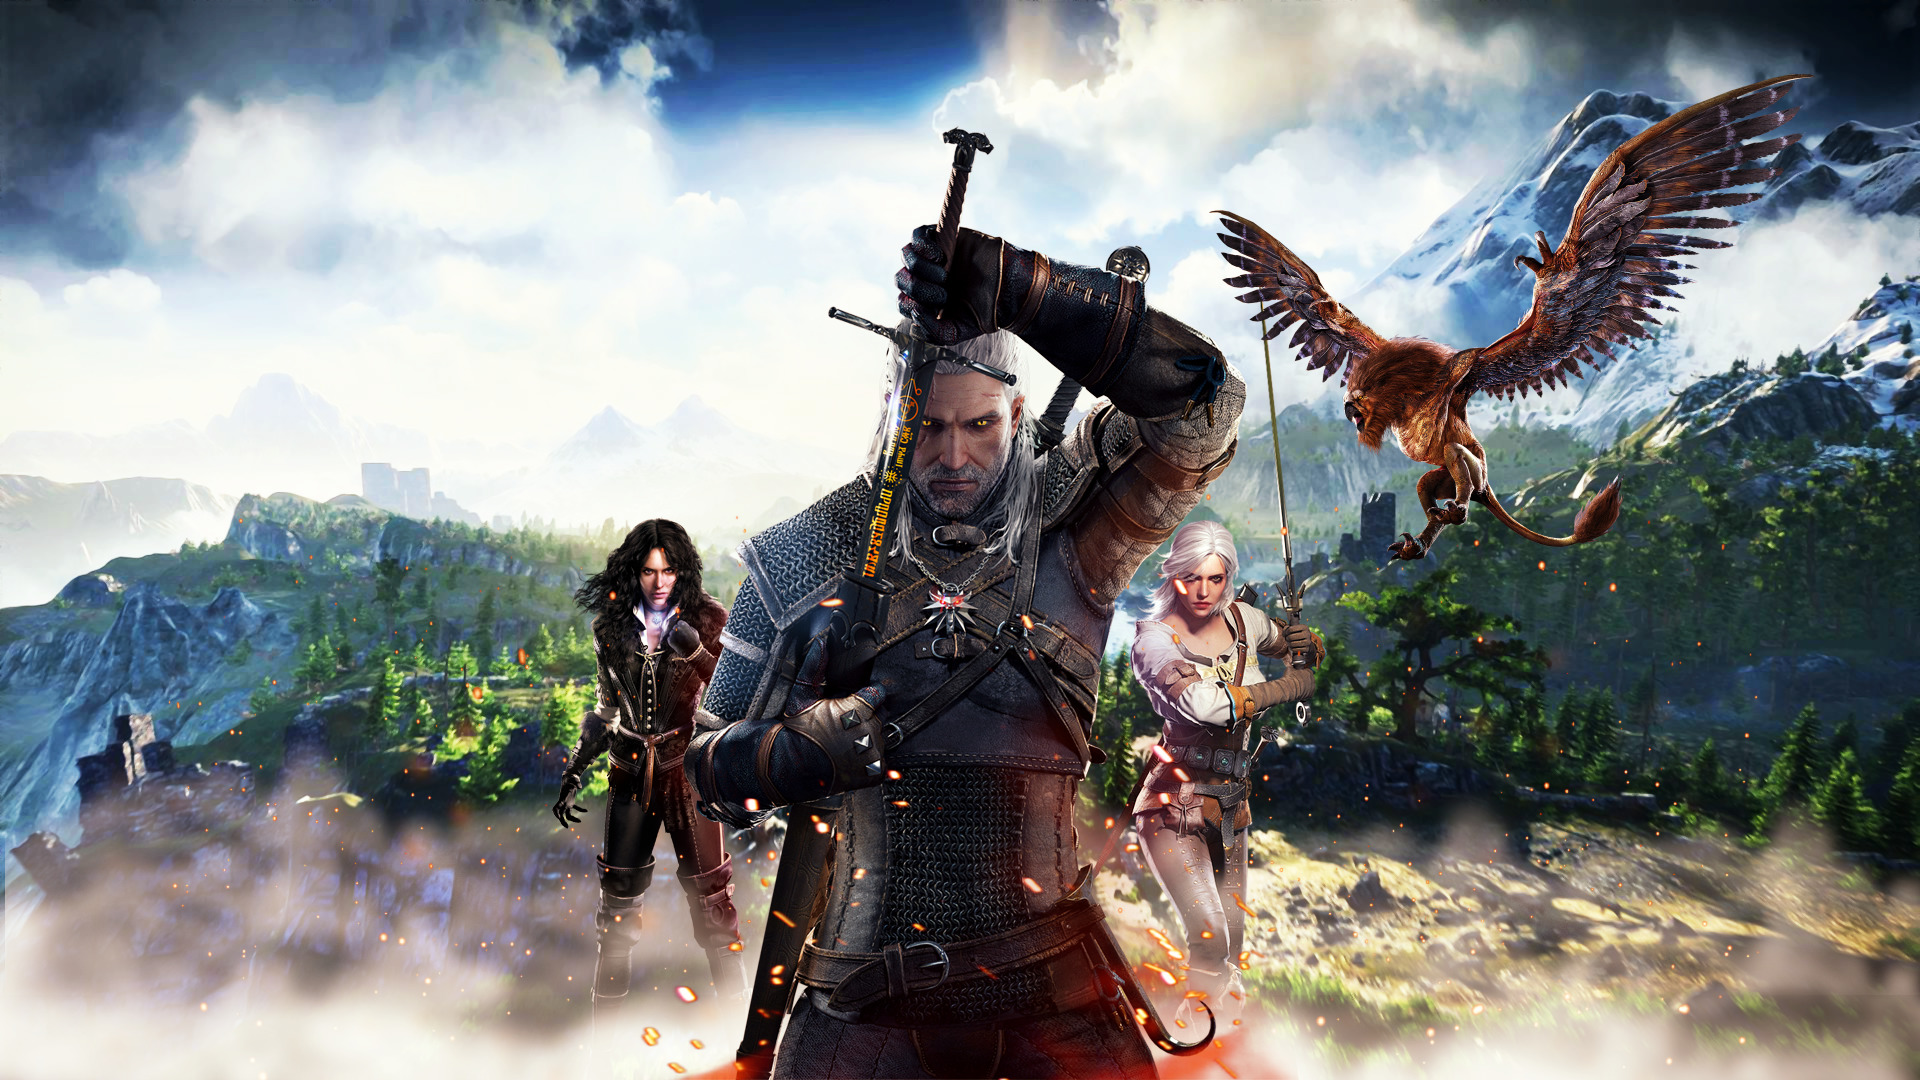 witcher wallpaper,action adventure game,pc game,games,strategy video game,screenshot